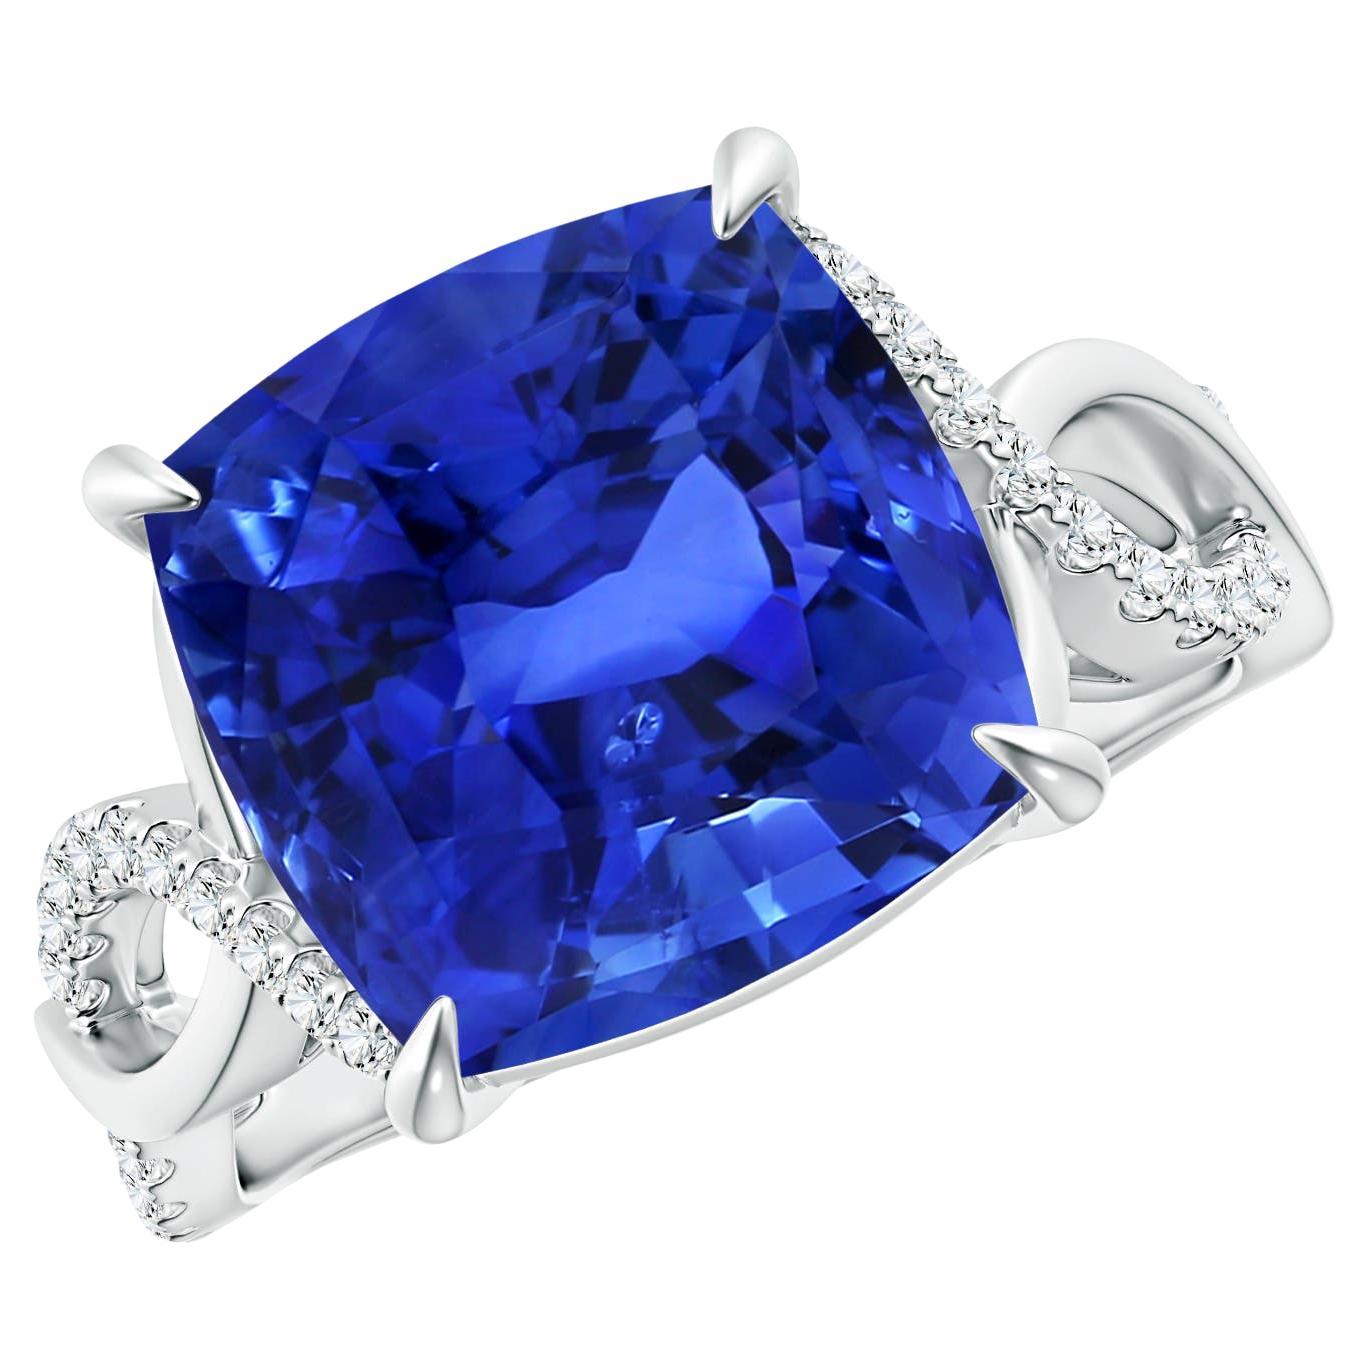 For Sale:  GIA Certified Natural Blue Sapphire Ring in White Gold with Diamonds